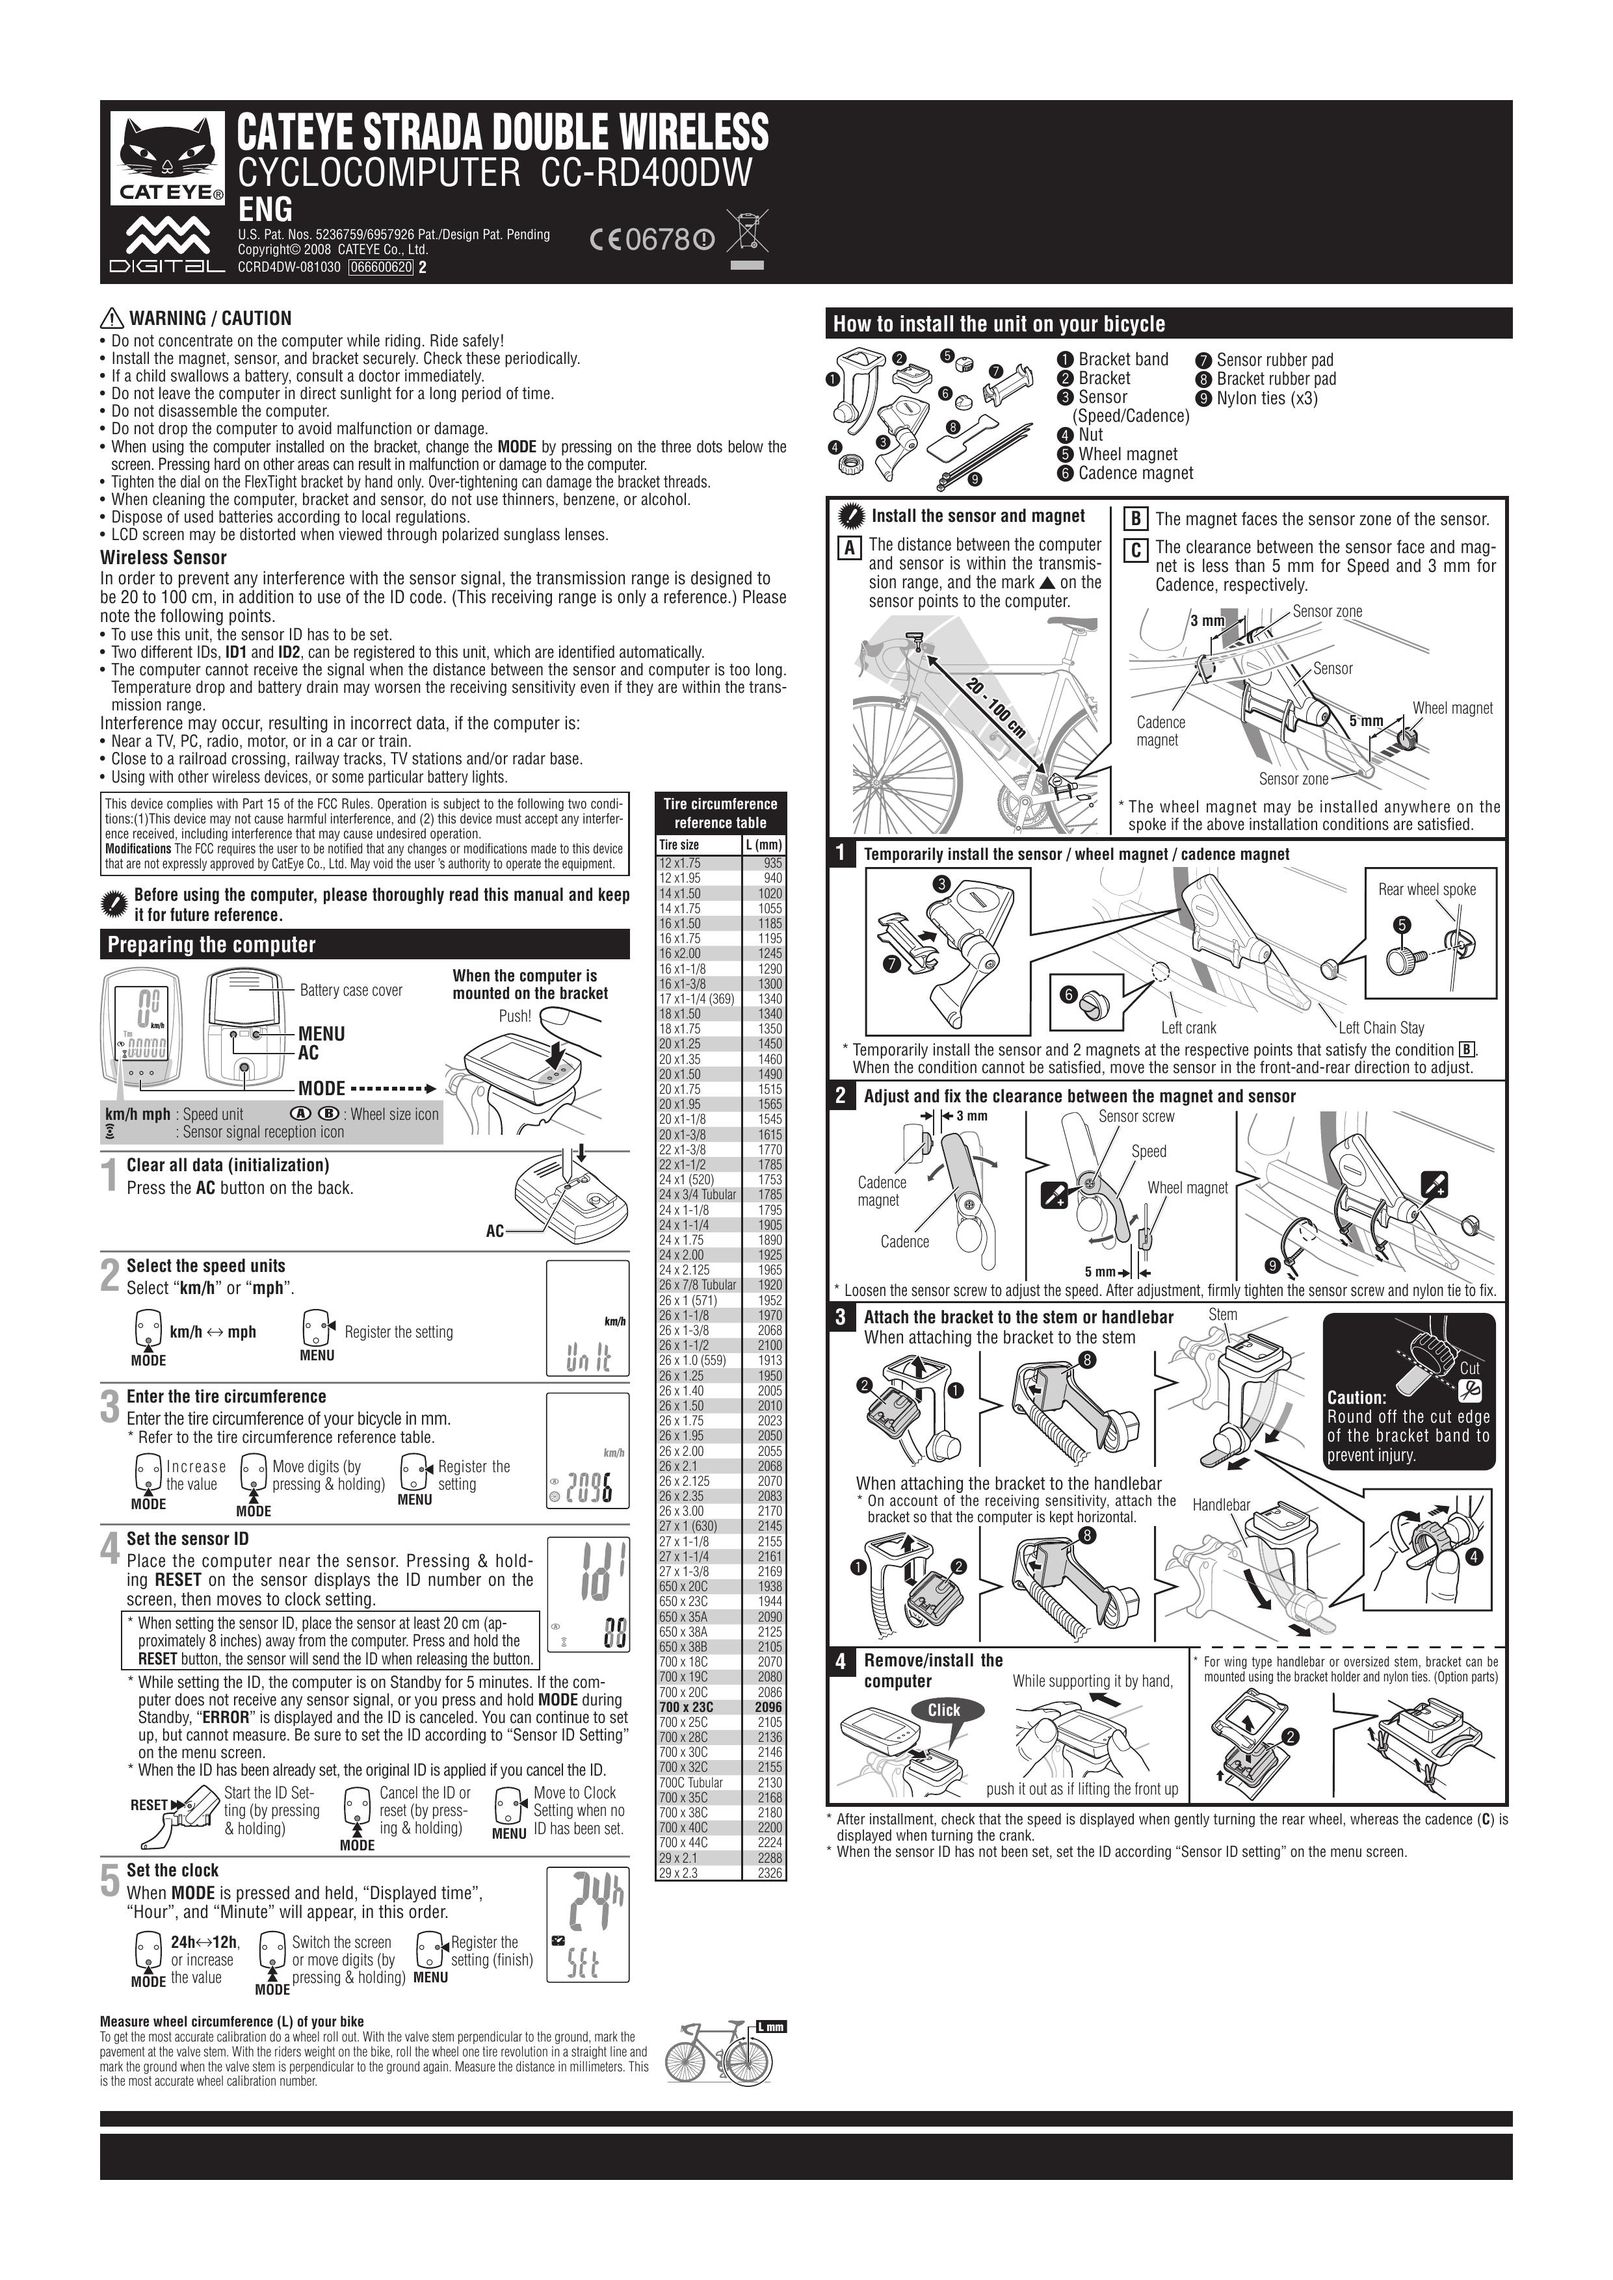 Cateye CCRD4DW-081030 Bicycle Accessories User Manual (Page 1)